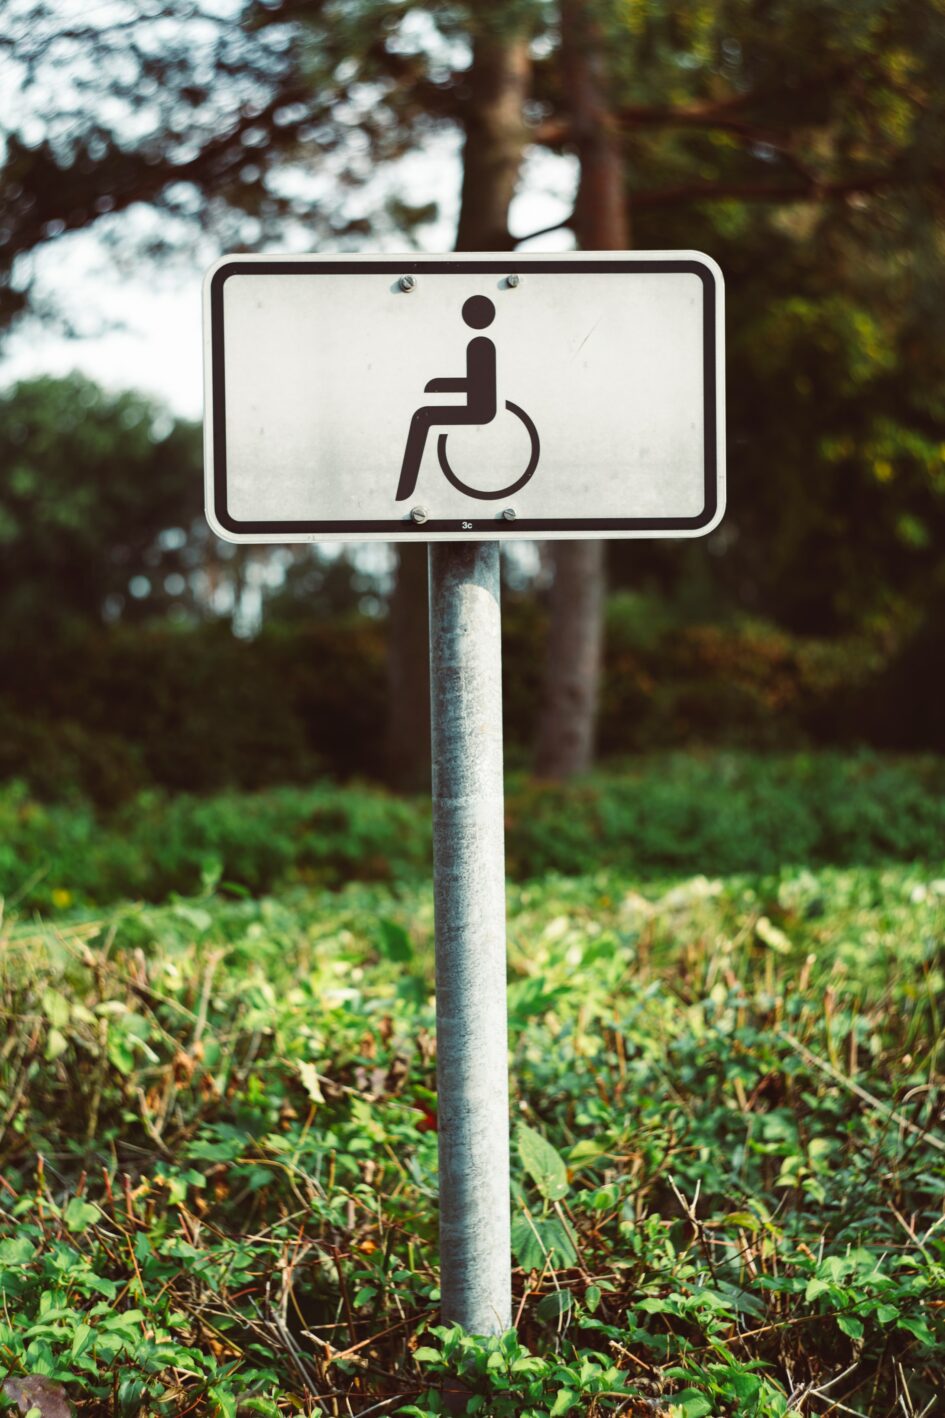 This photo shows a sign placed in the grass likely in a park or field. On the sign is a picture of an individual in a wheelchair.